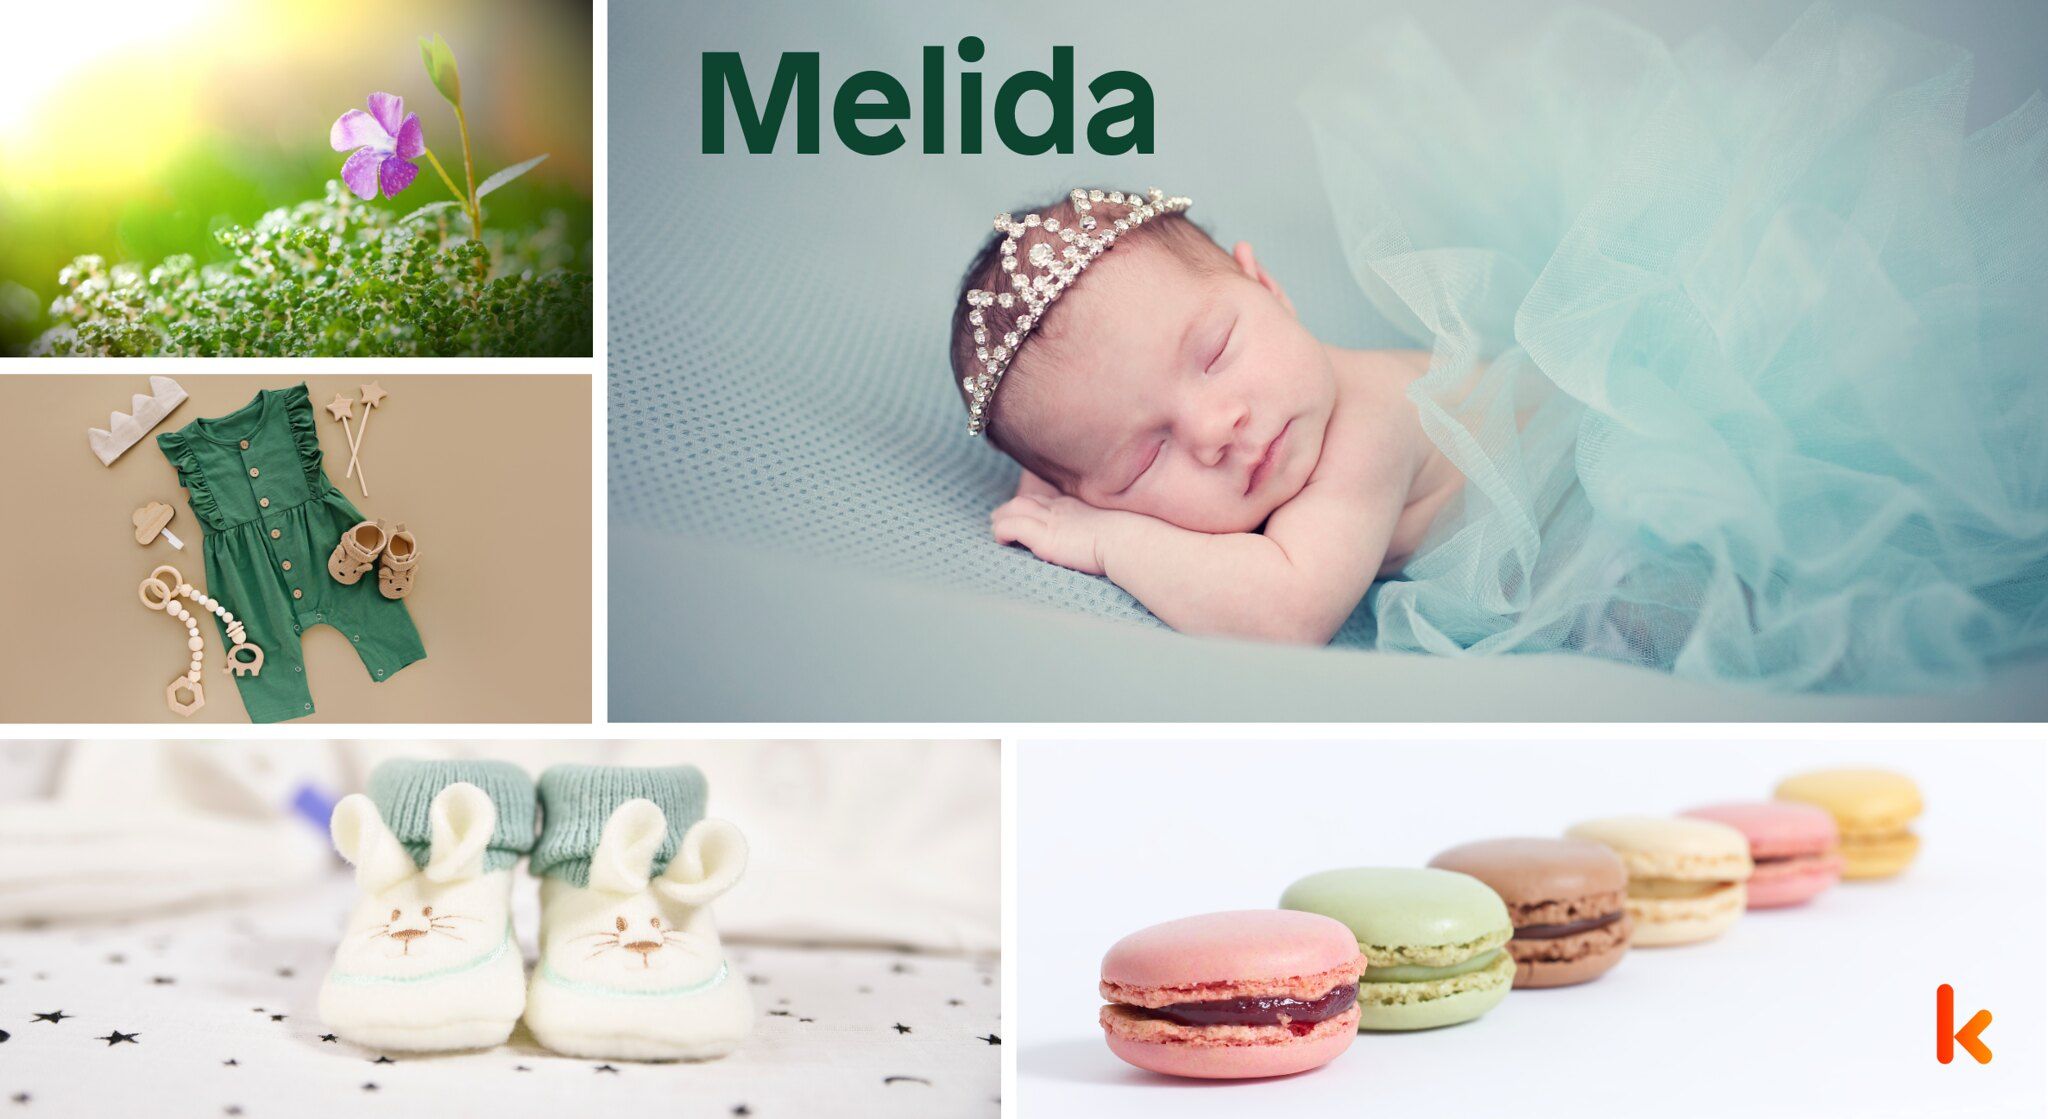 Meaning of the name Melida